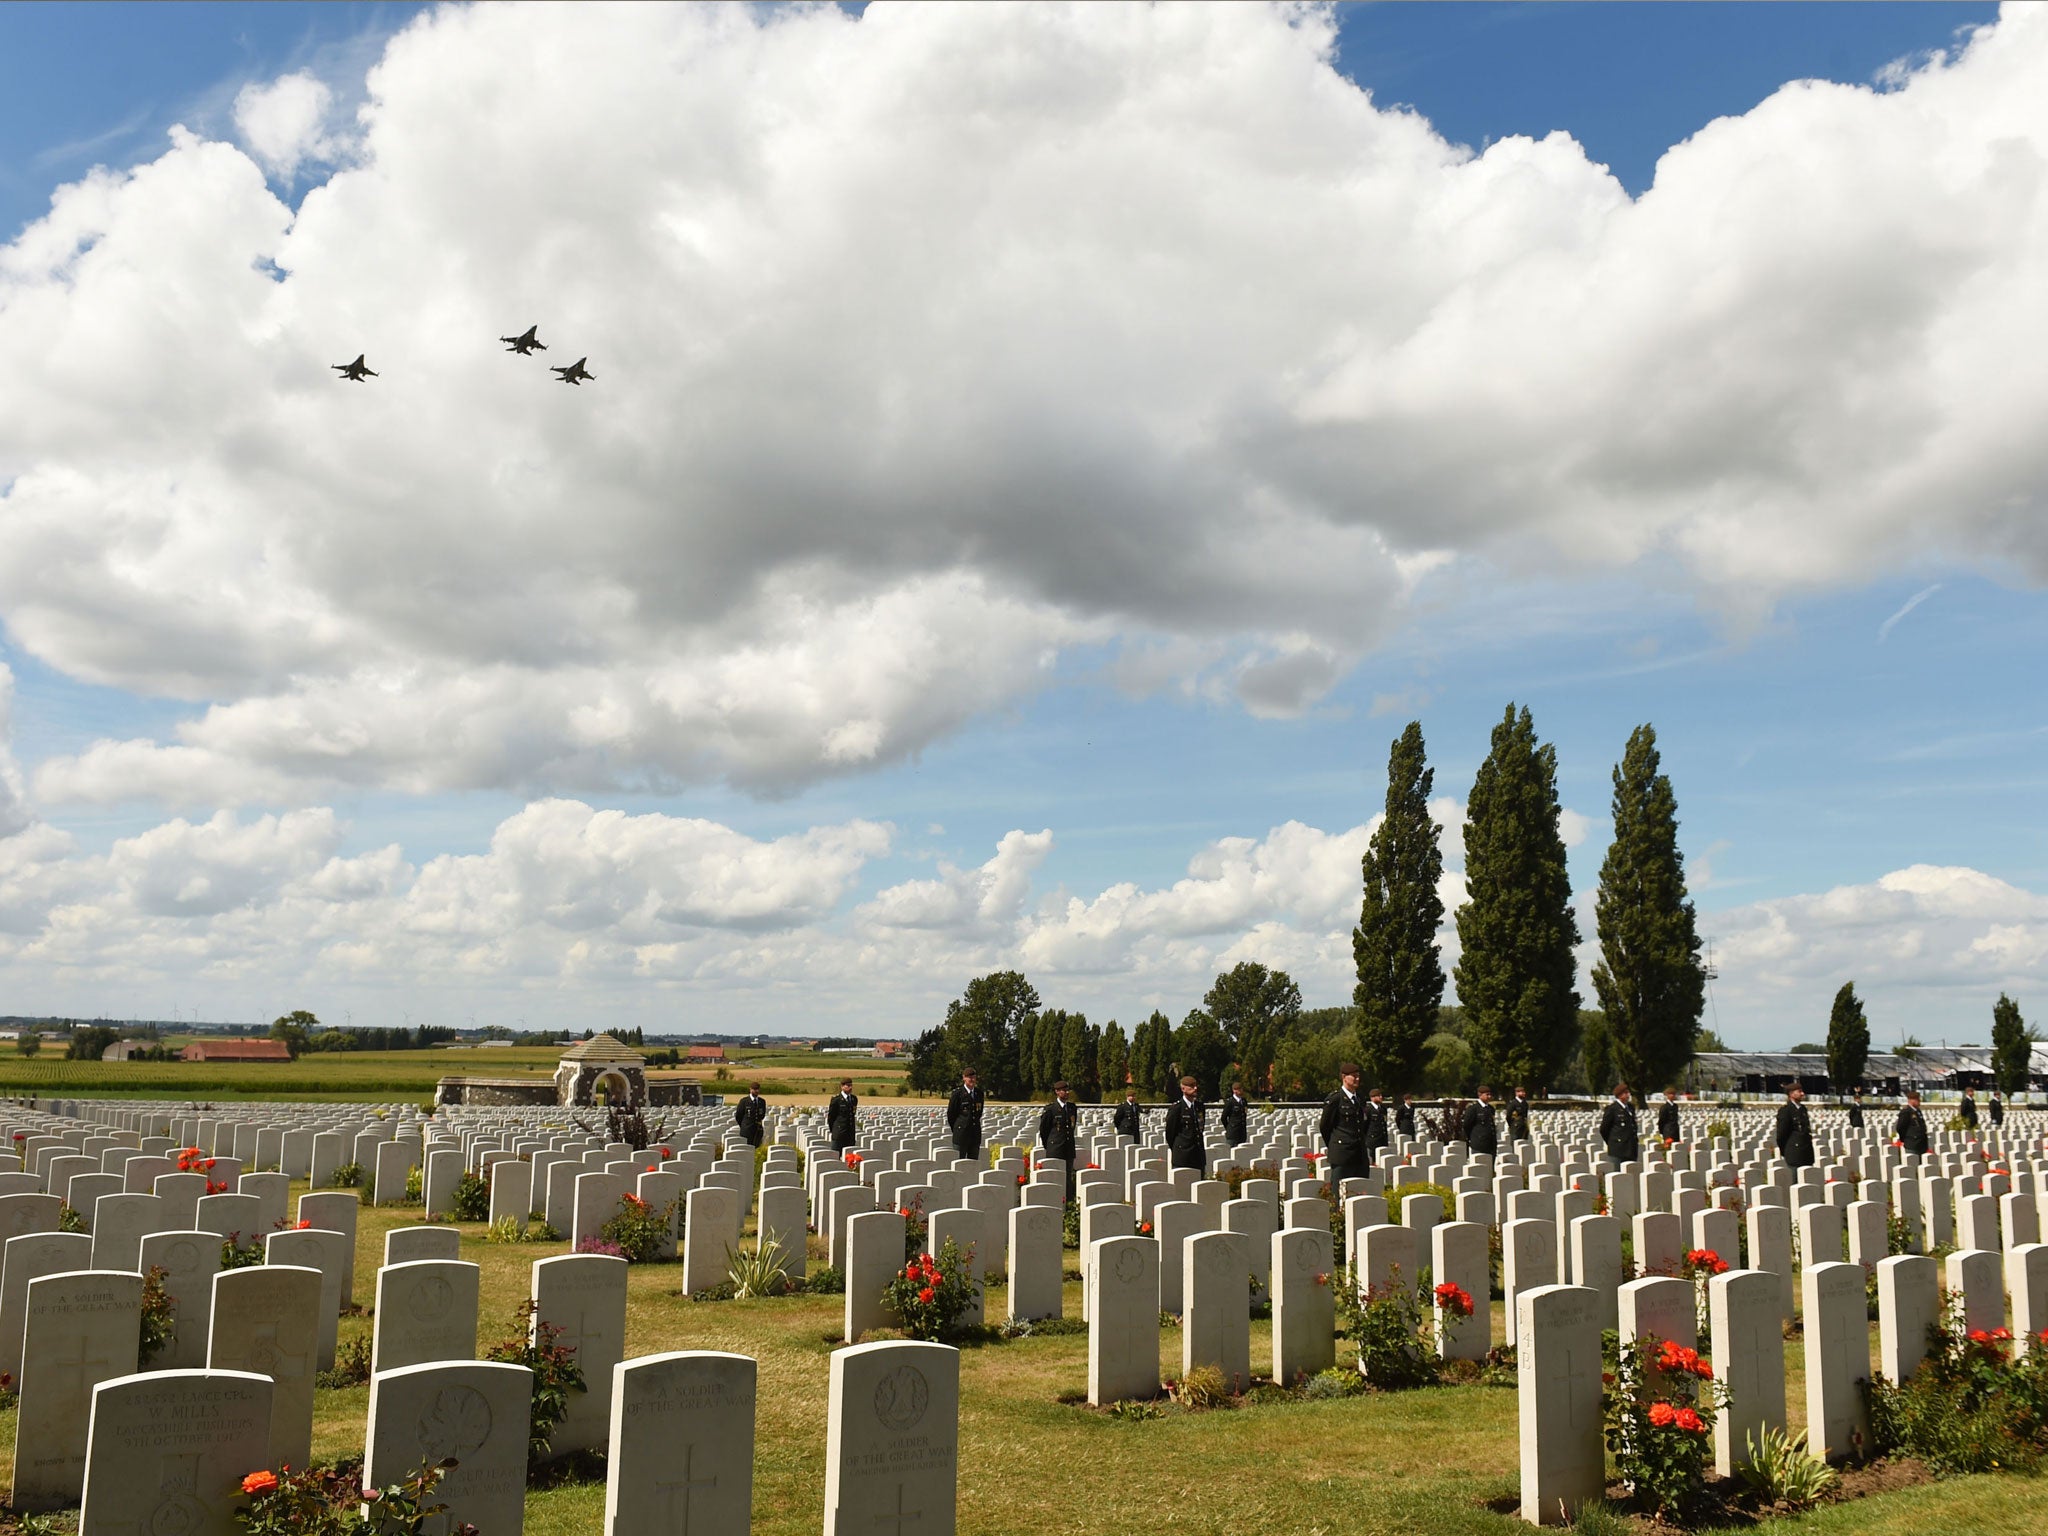 A military flypast over Tyne Cot Commonwealth War Graves Cemetery in Ypres